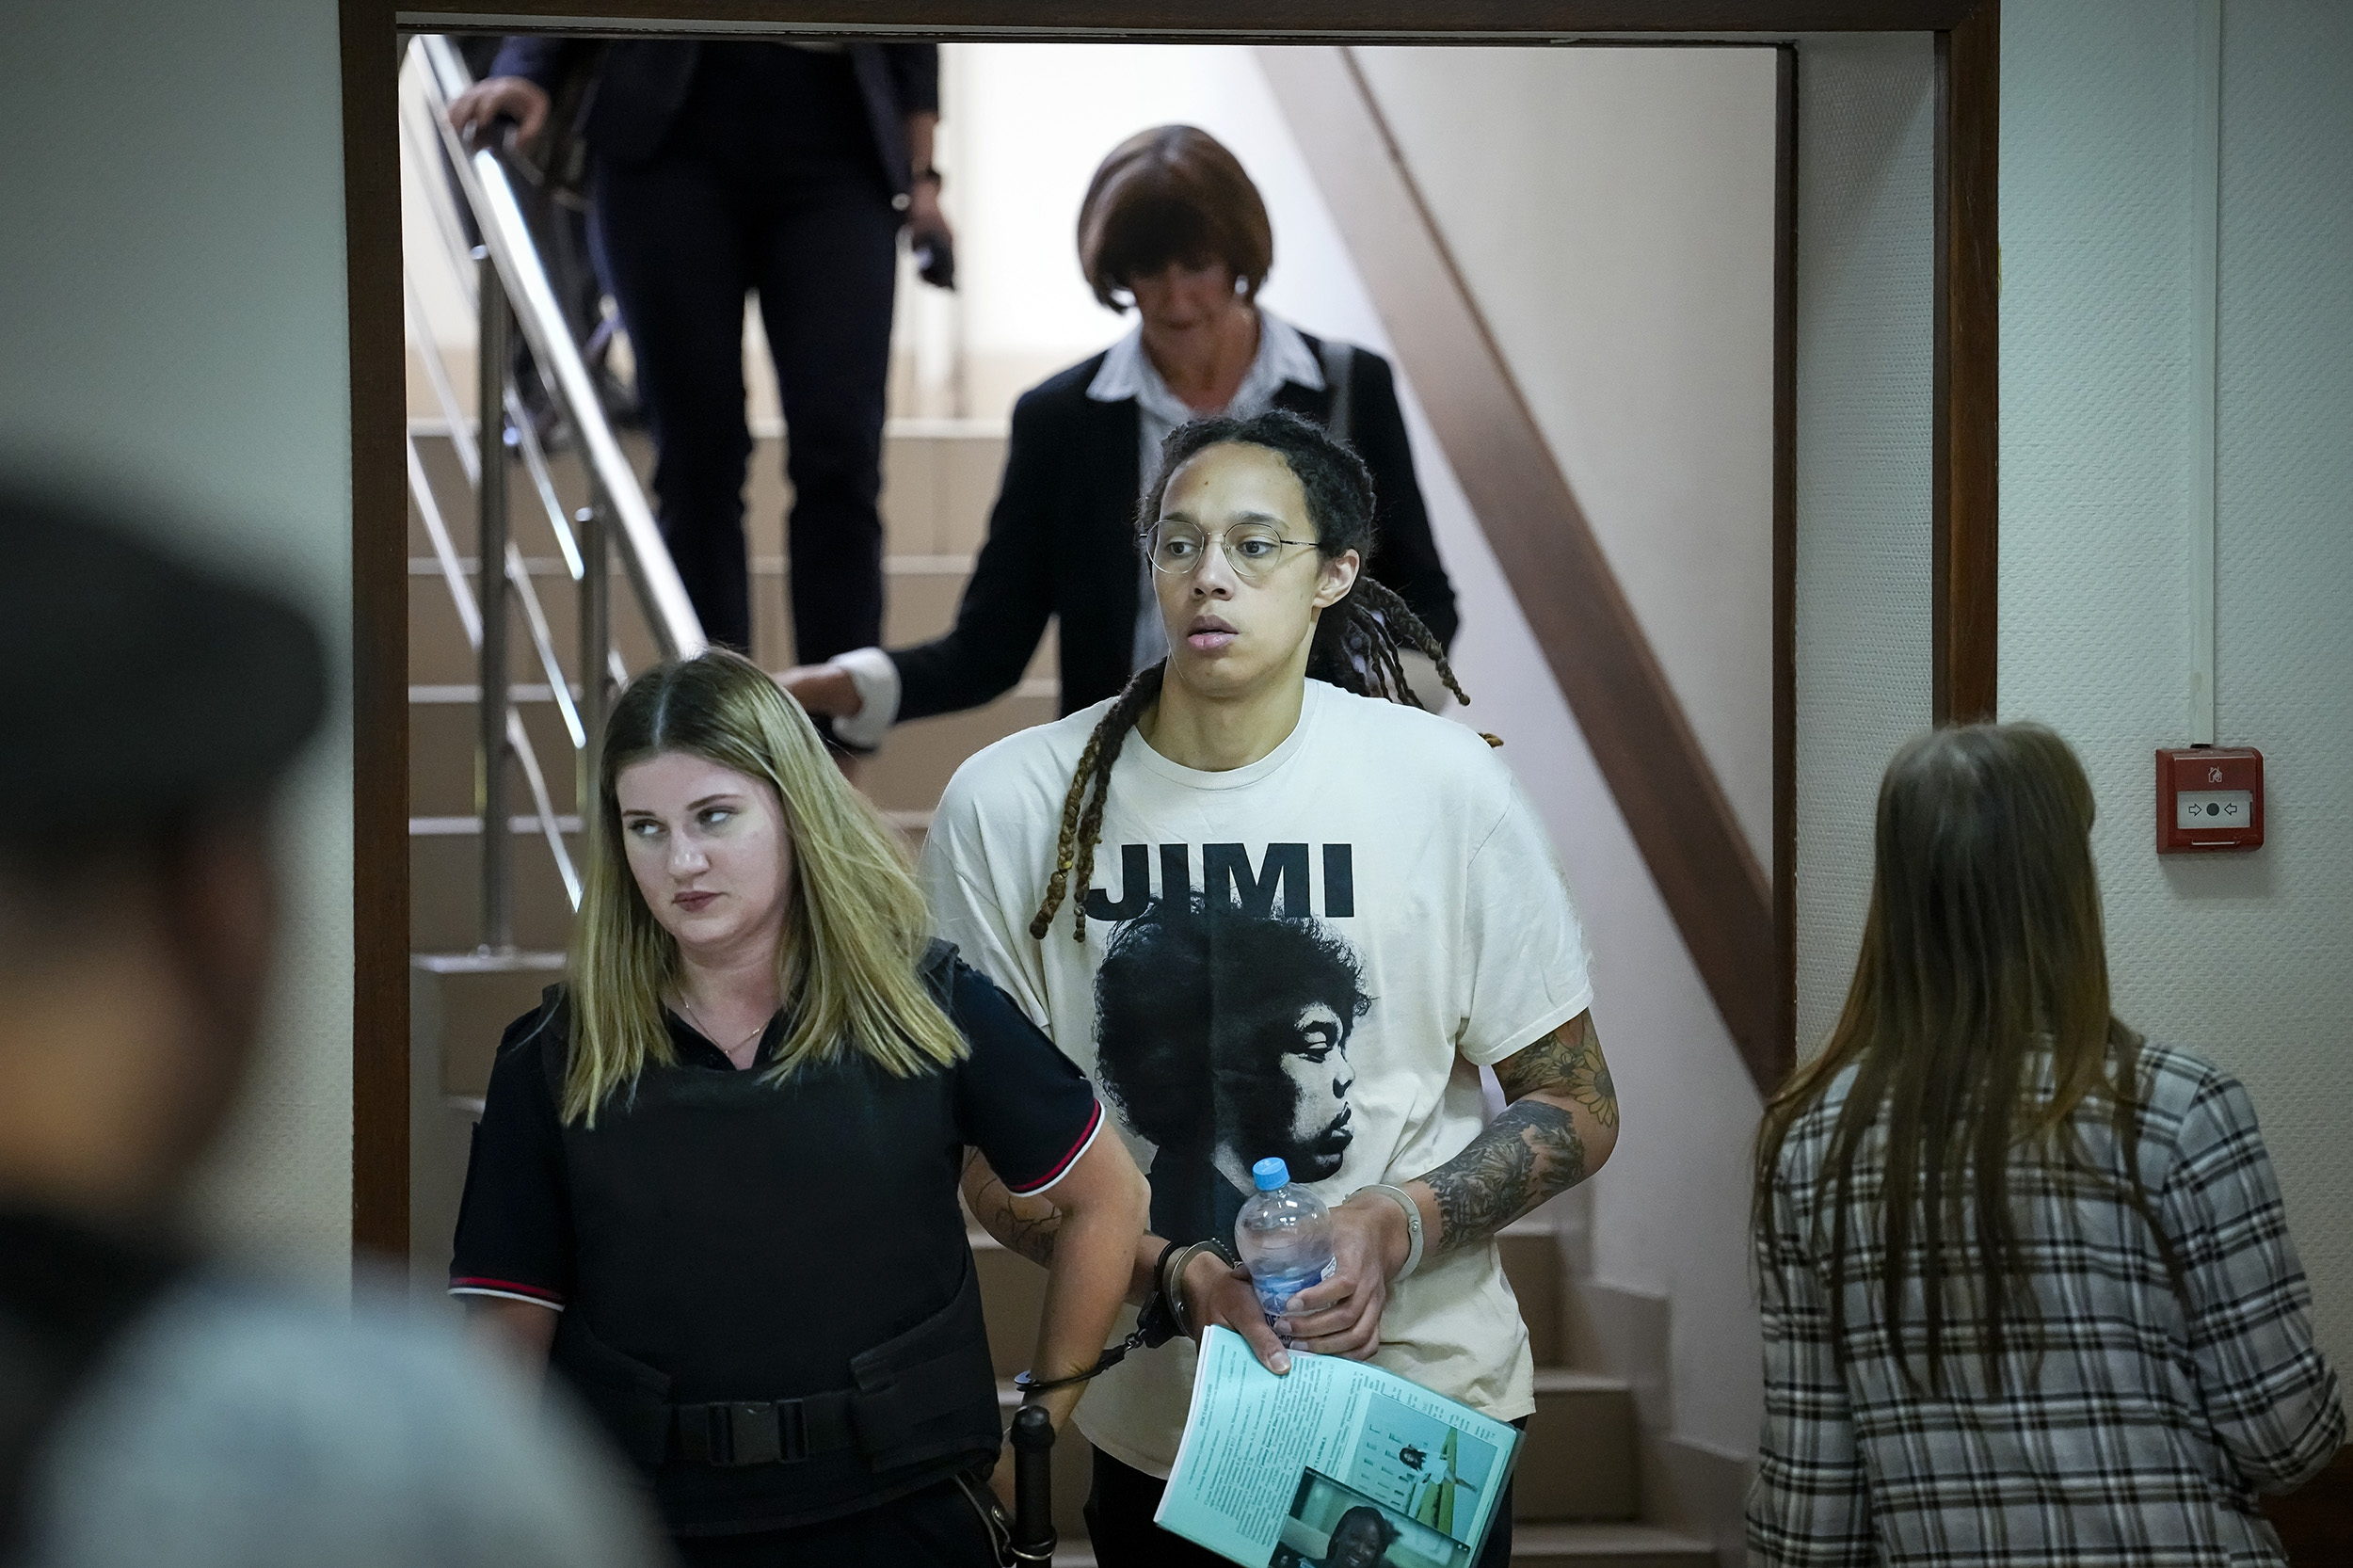 The Brittney Griner case has “indisputable evidence,” the Russian Foreign Ministry said